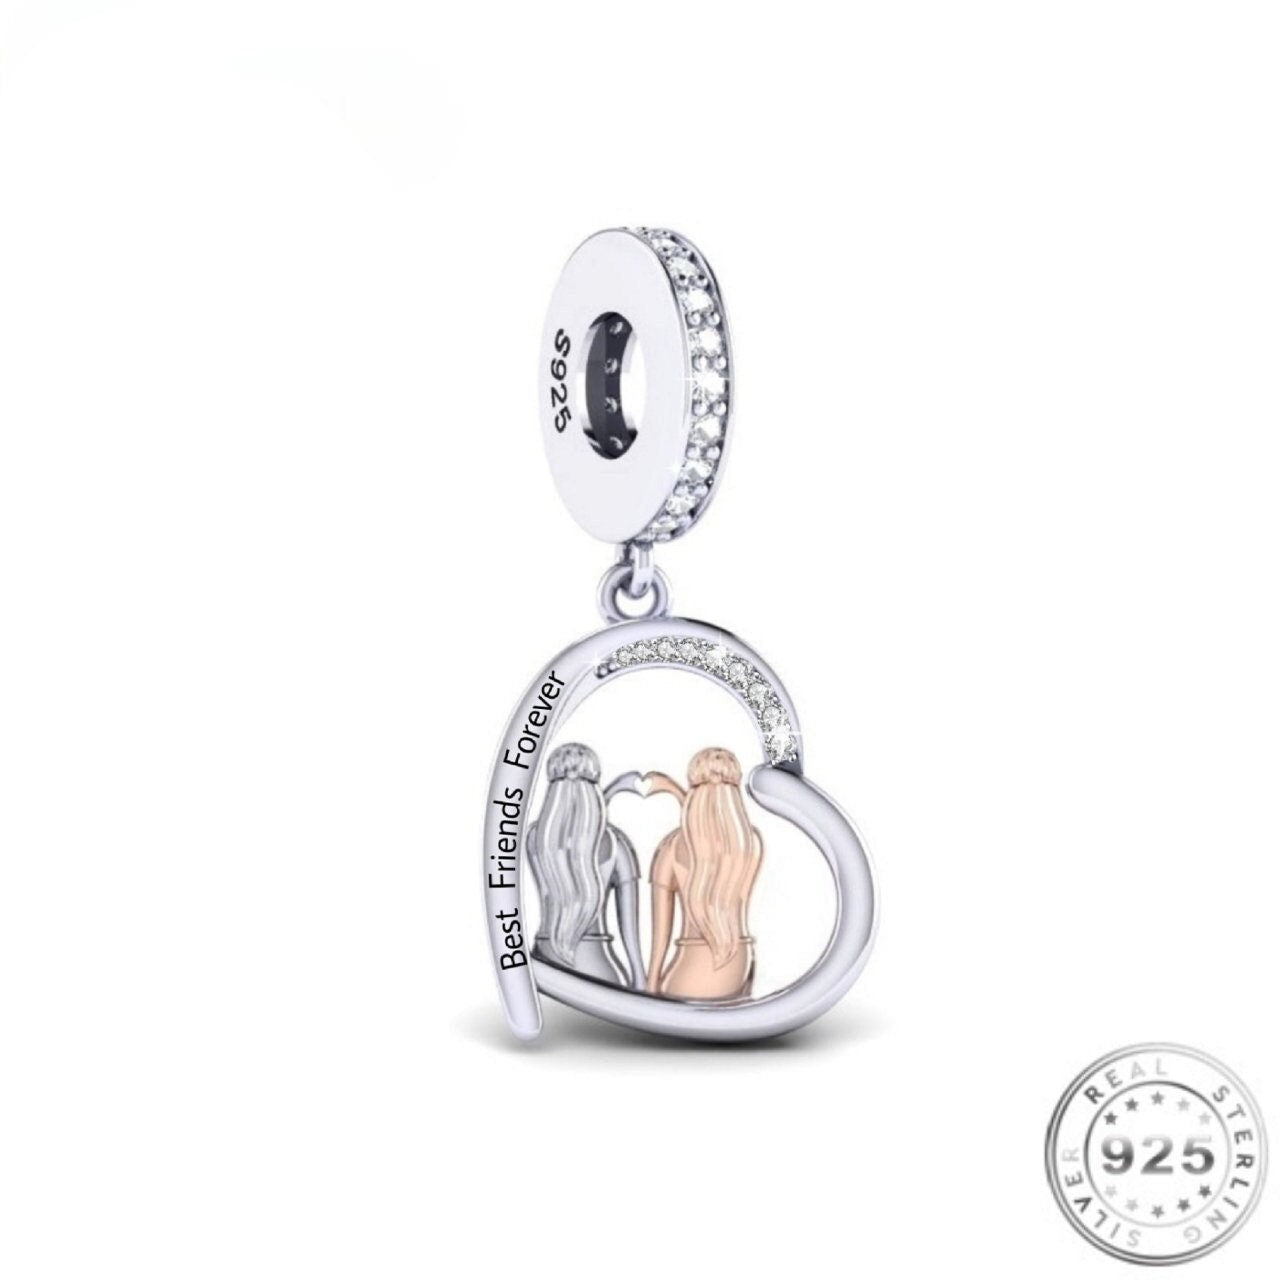 Best Friends Forever Charm 925 Sterling Silver fits pandora BFF